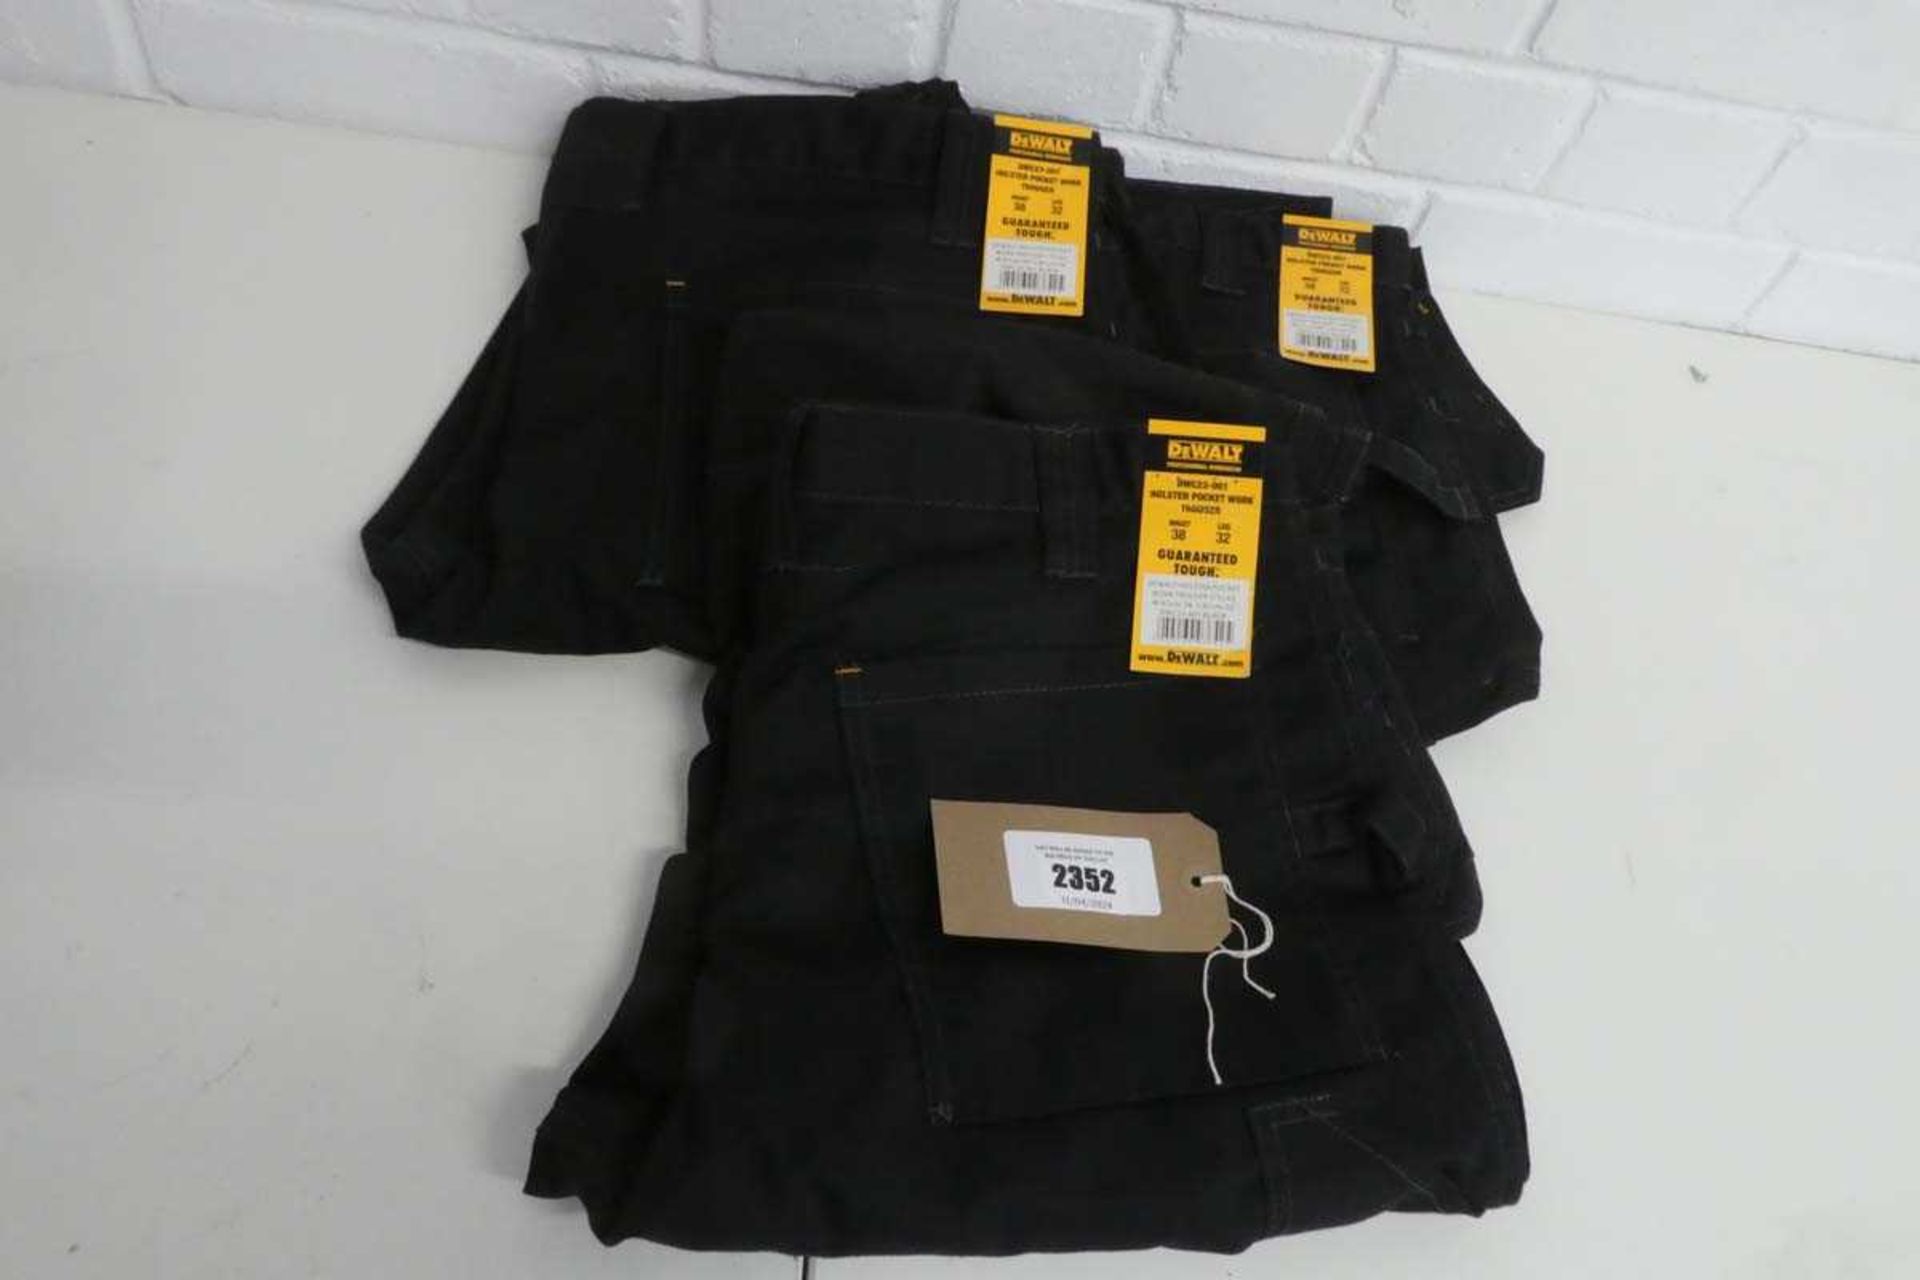 +VAT 3 pairs of Dewalt holster pocket work trousers (all size W38 L32)